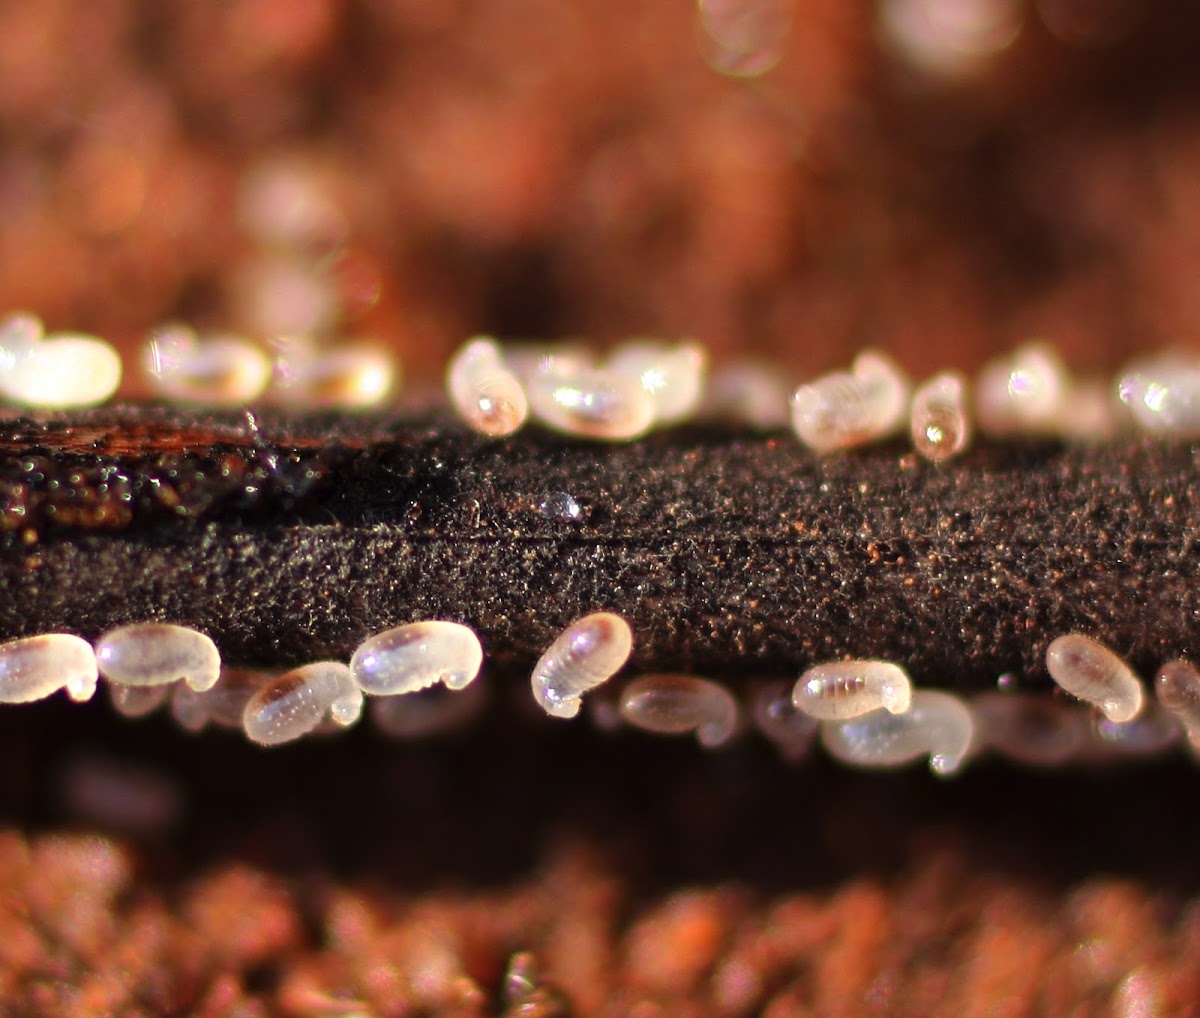 Brown house ant eggs